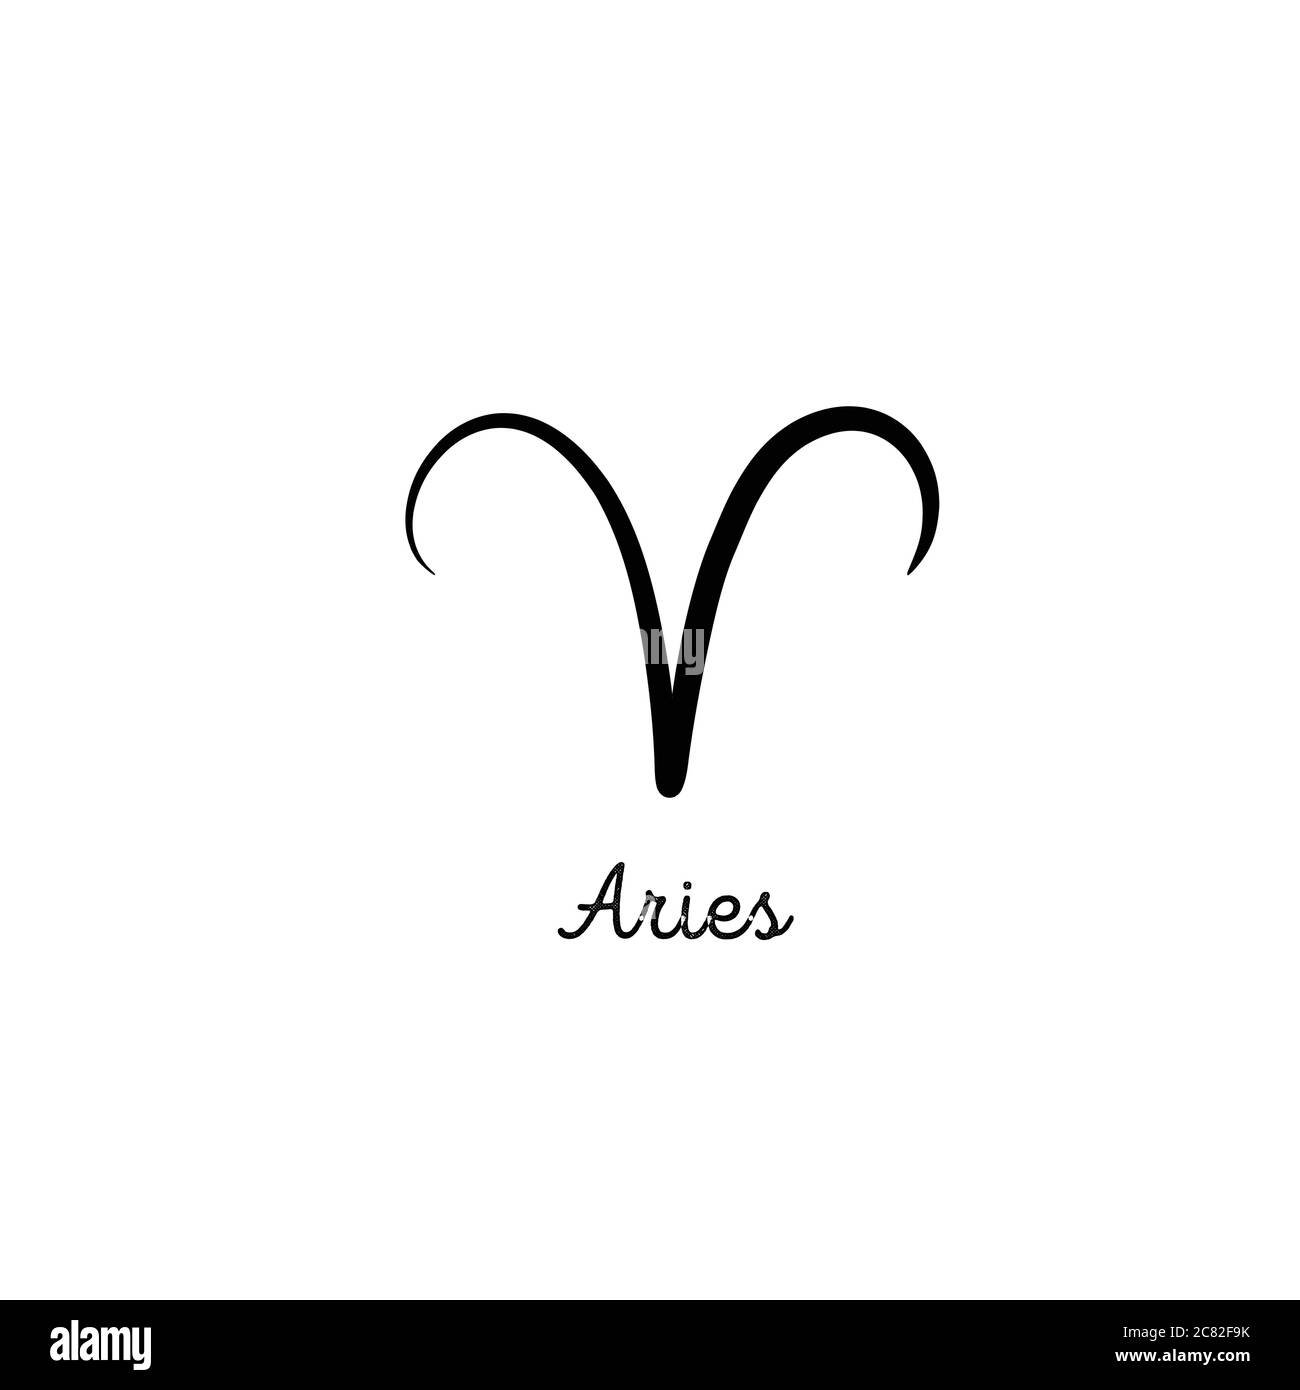 11 Aries Constellation Tattoo Ideas Youll Have To See To Believe  alexie